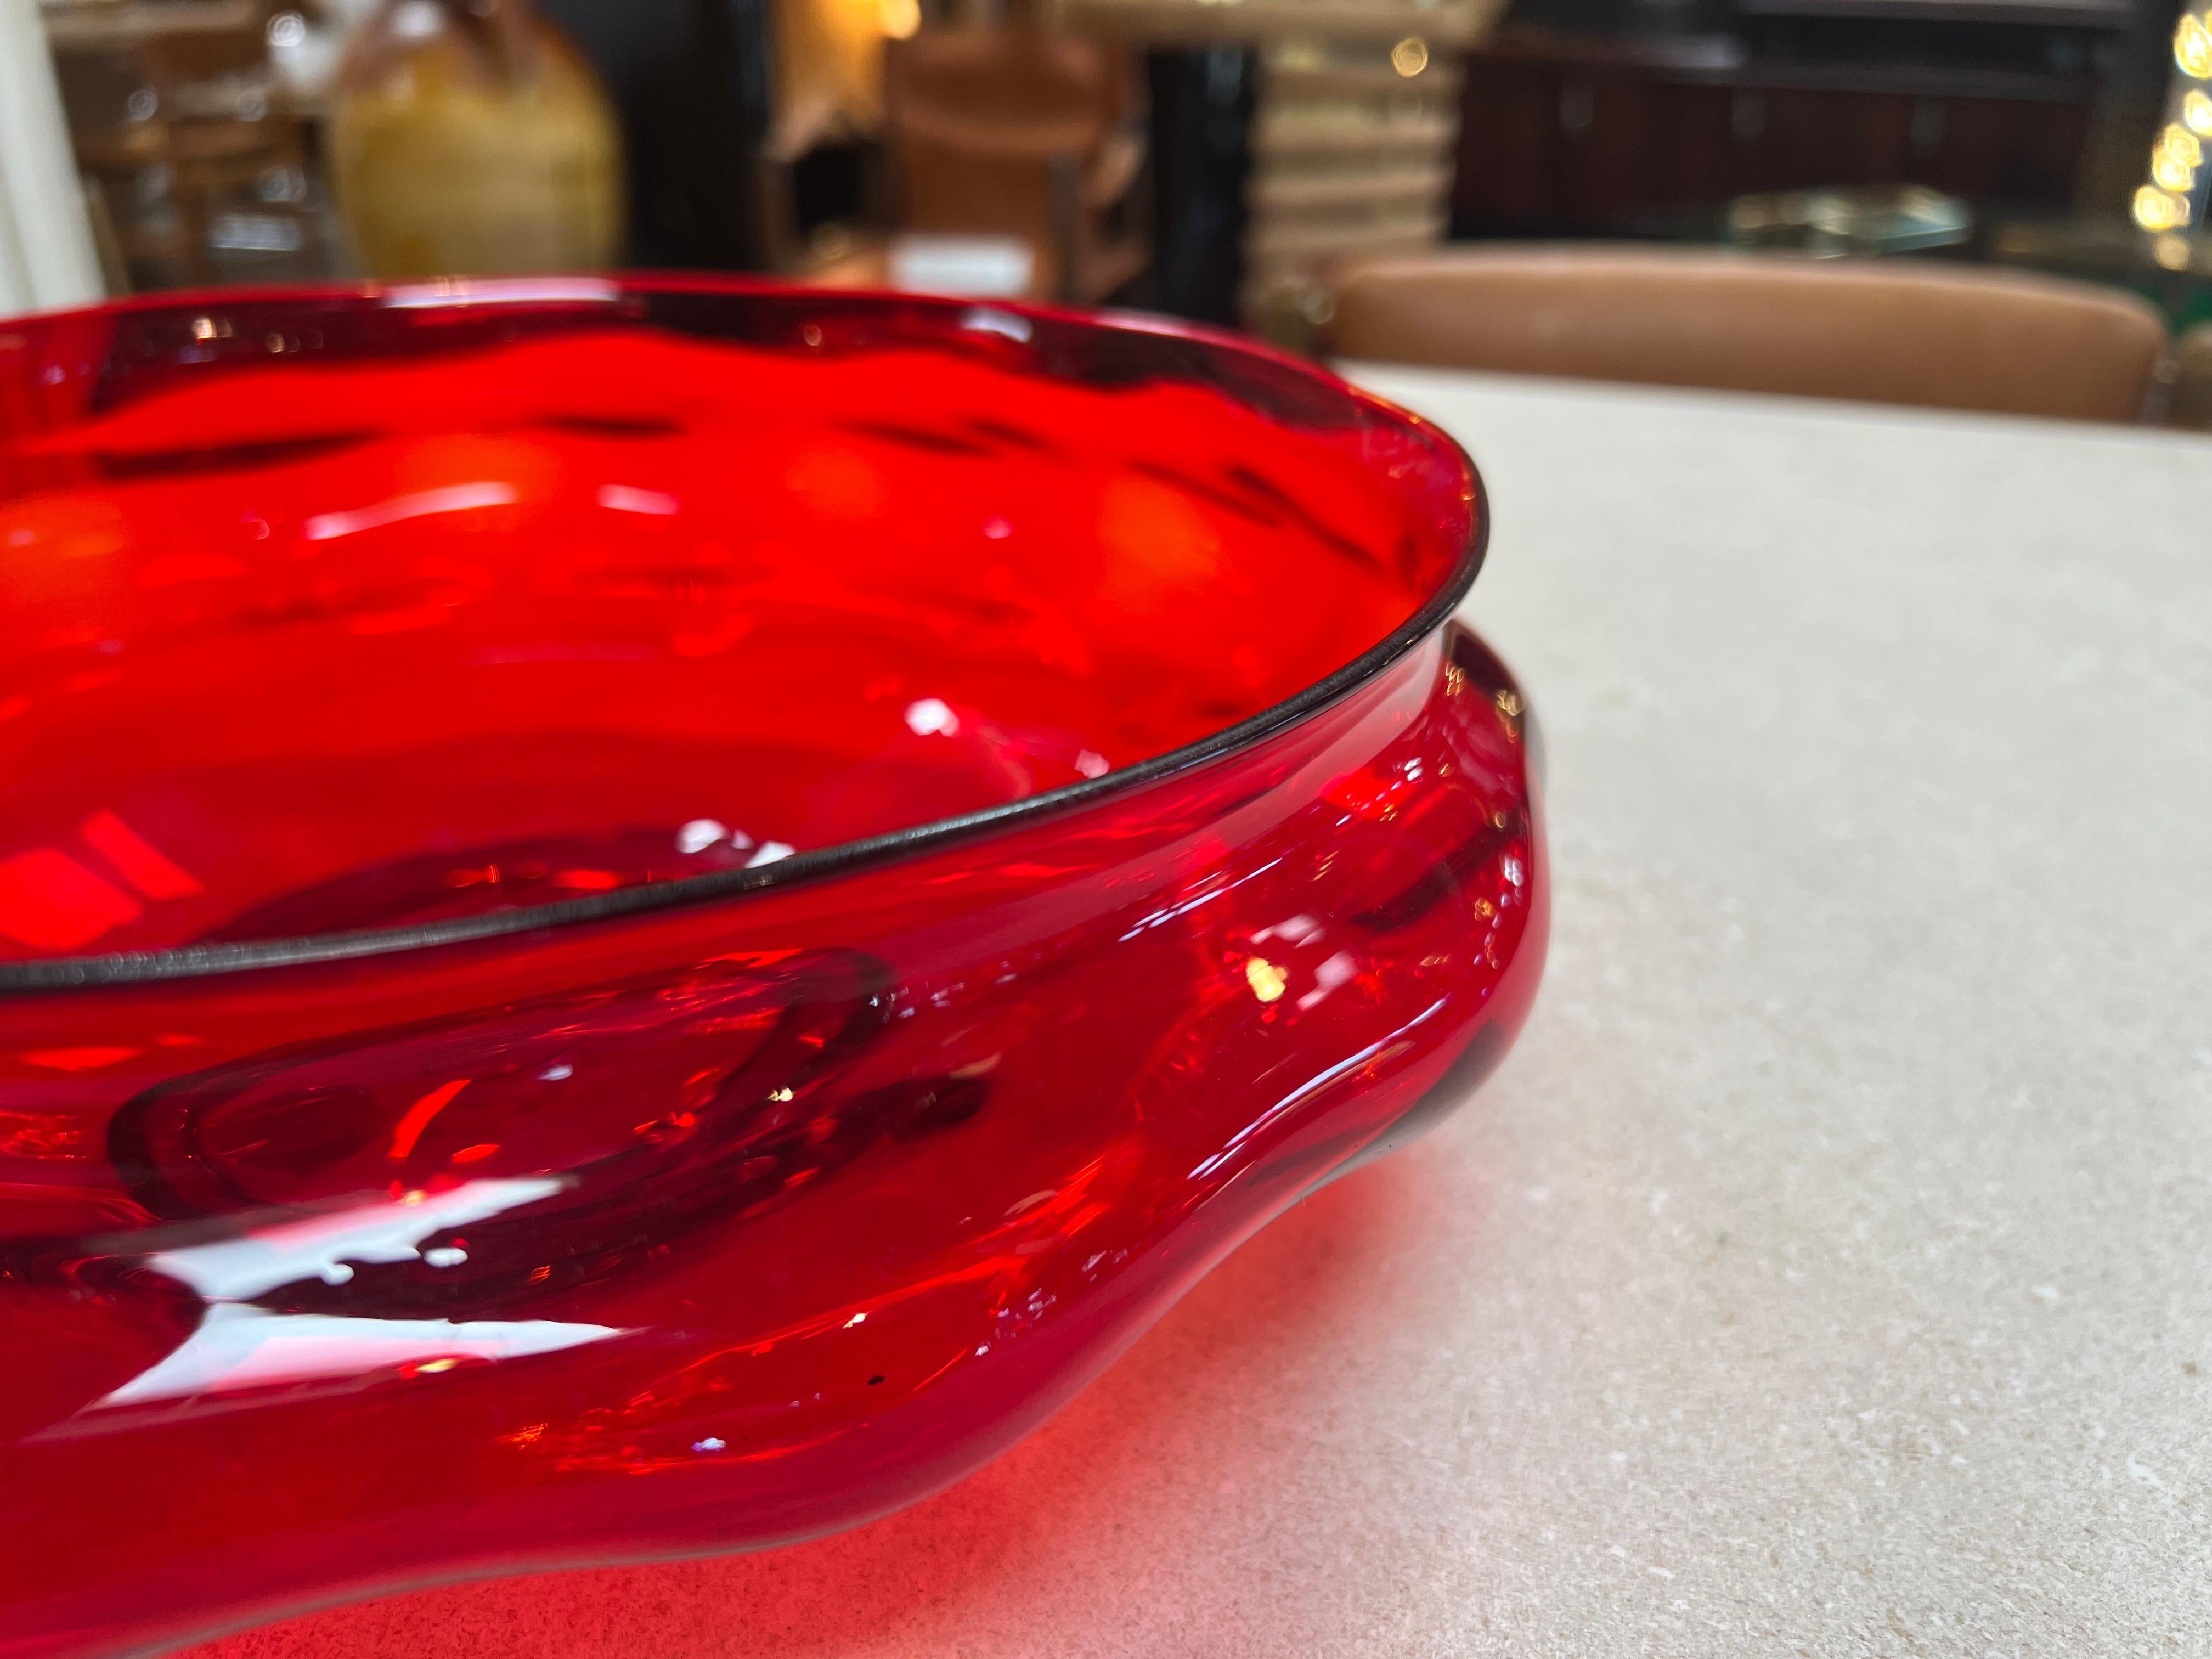 The Beautiful Vintage Italian Round Decorative Red Bowl from the 1980s is a striking testament to Italian design and craftsmanship. With its alluring red hue and rounded form, this bowl captures attention and evokes a sense of warmth. Crafted with